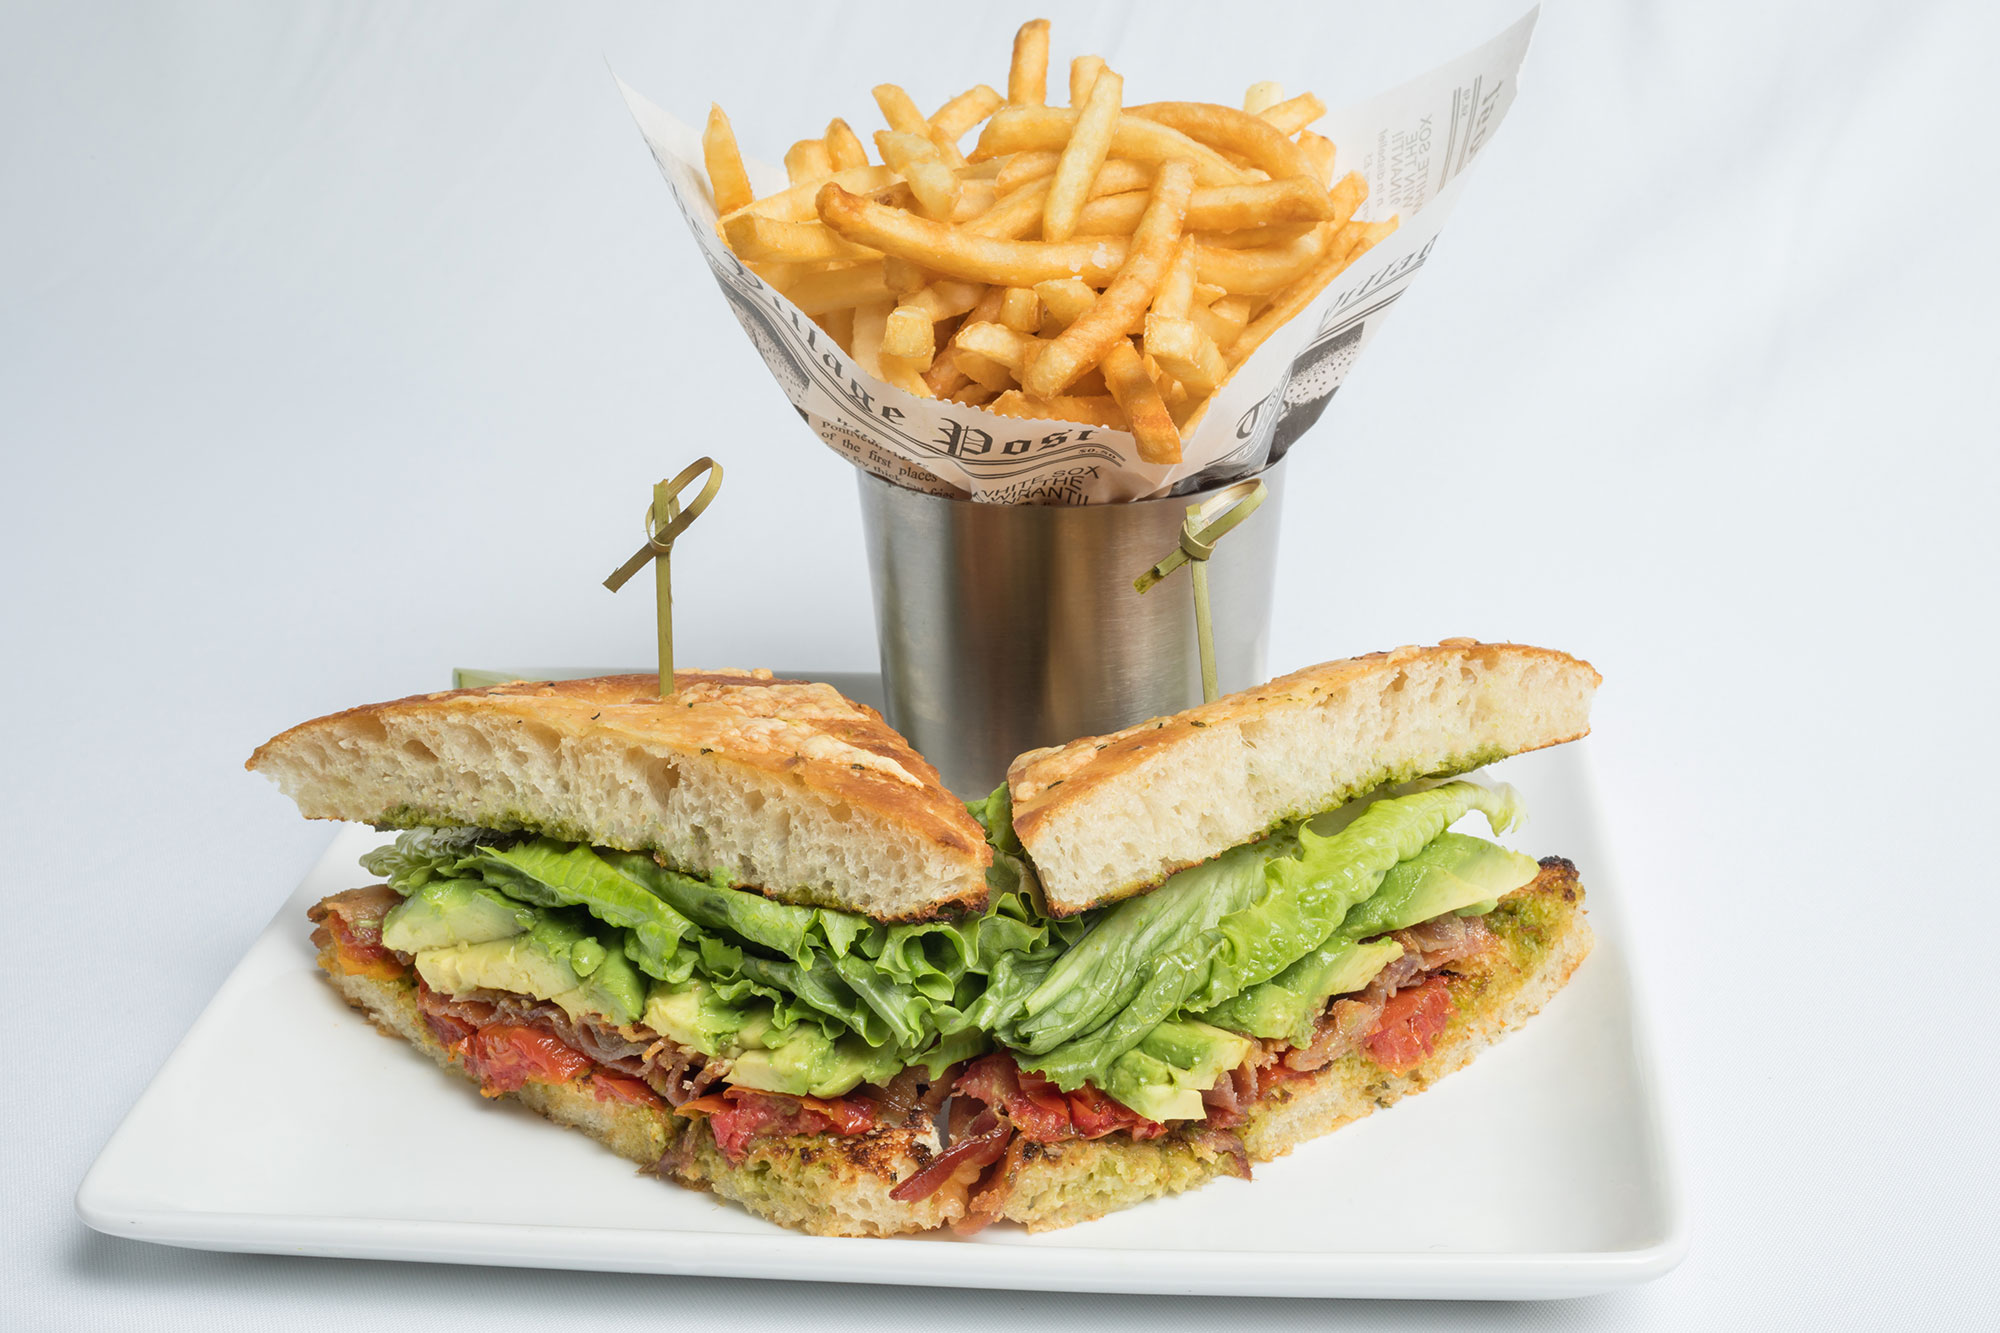 Avocado and bacon sandwich, served with a side of fries, from The Longwood Grille and Bar